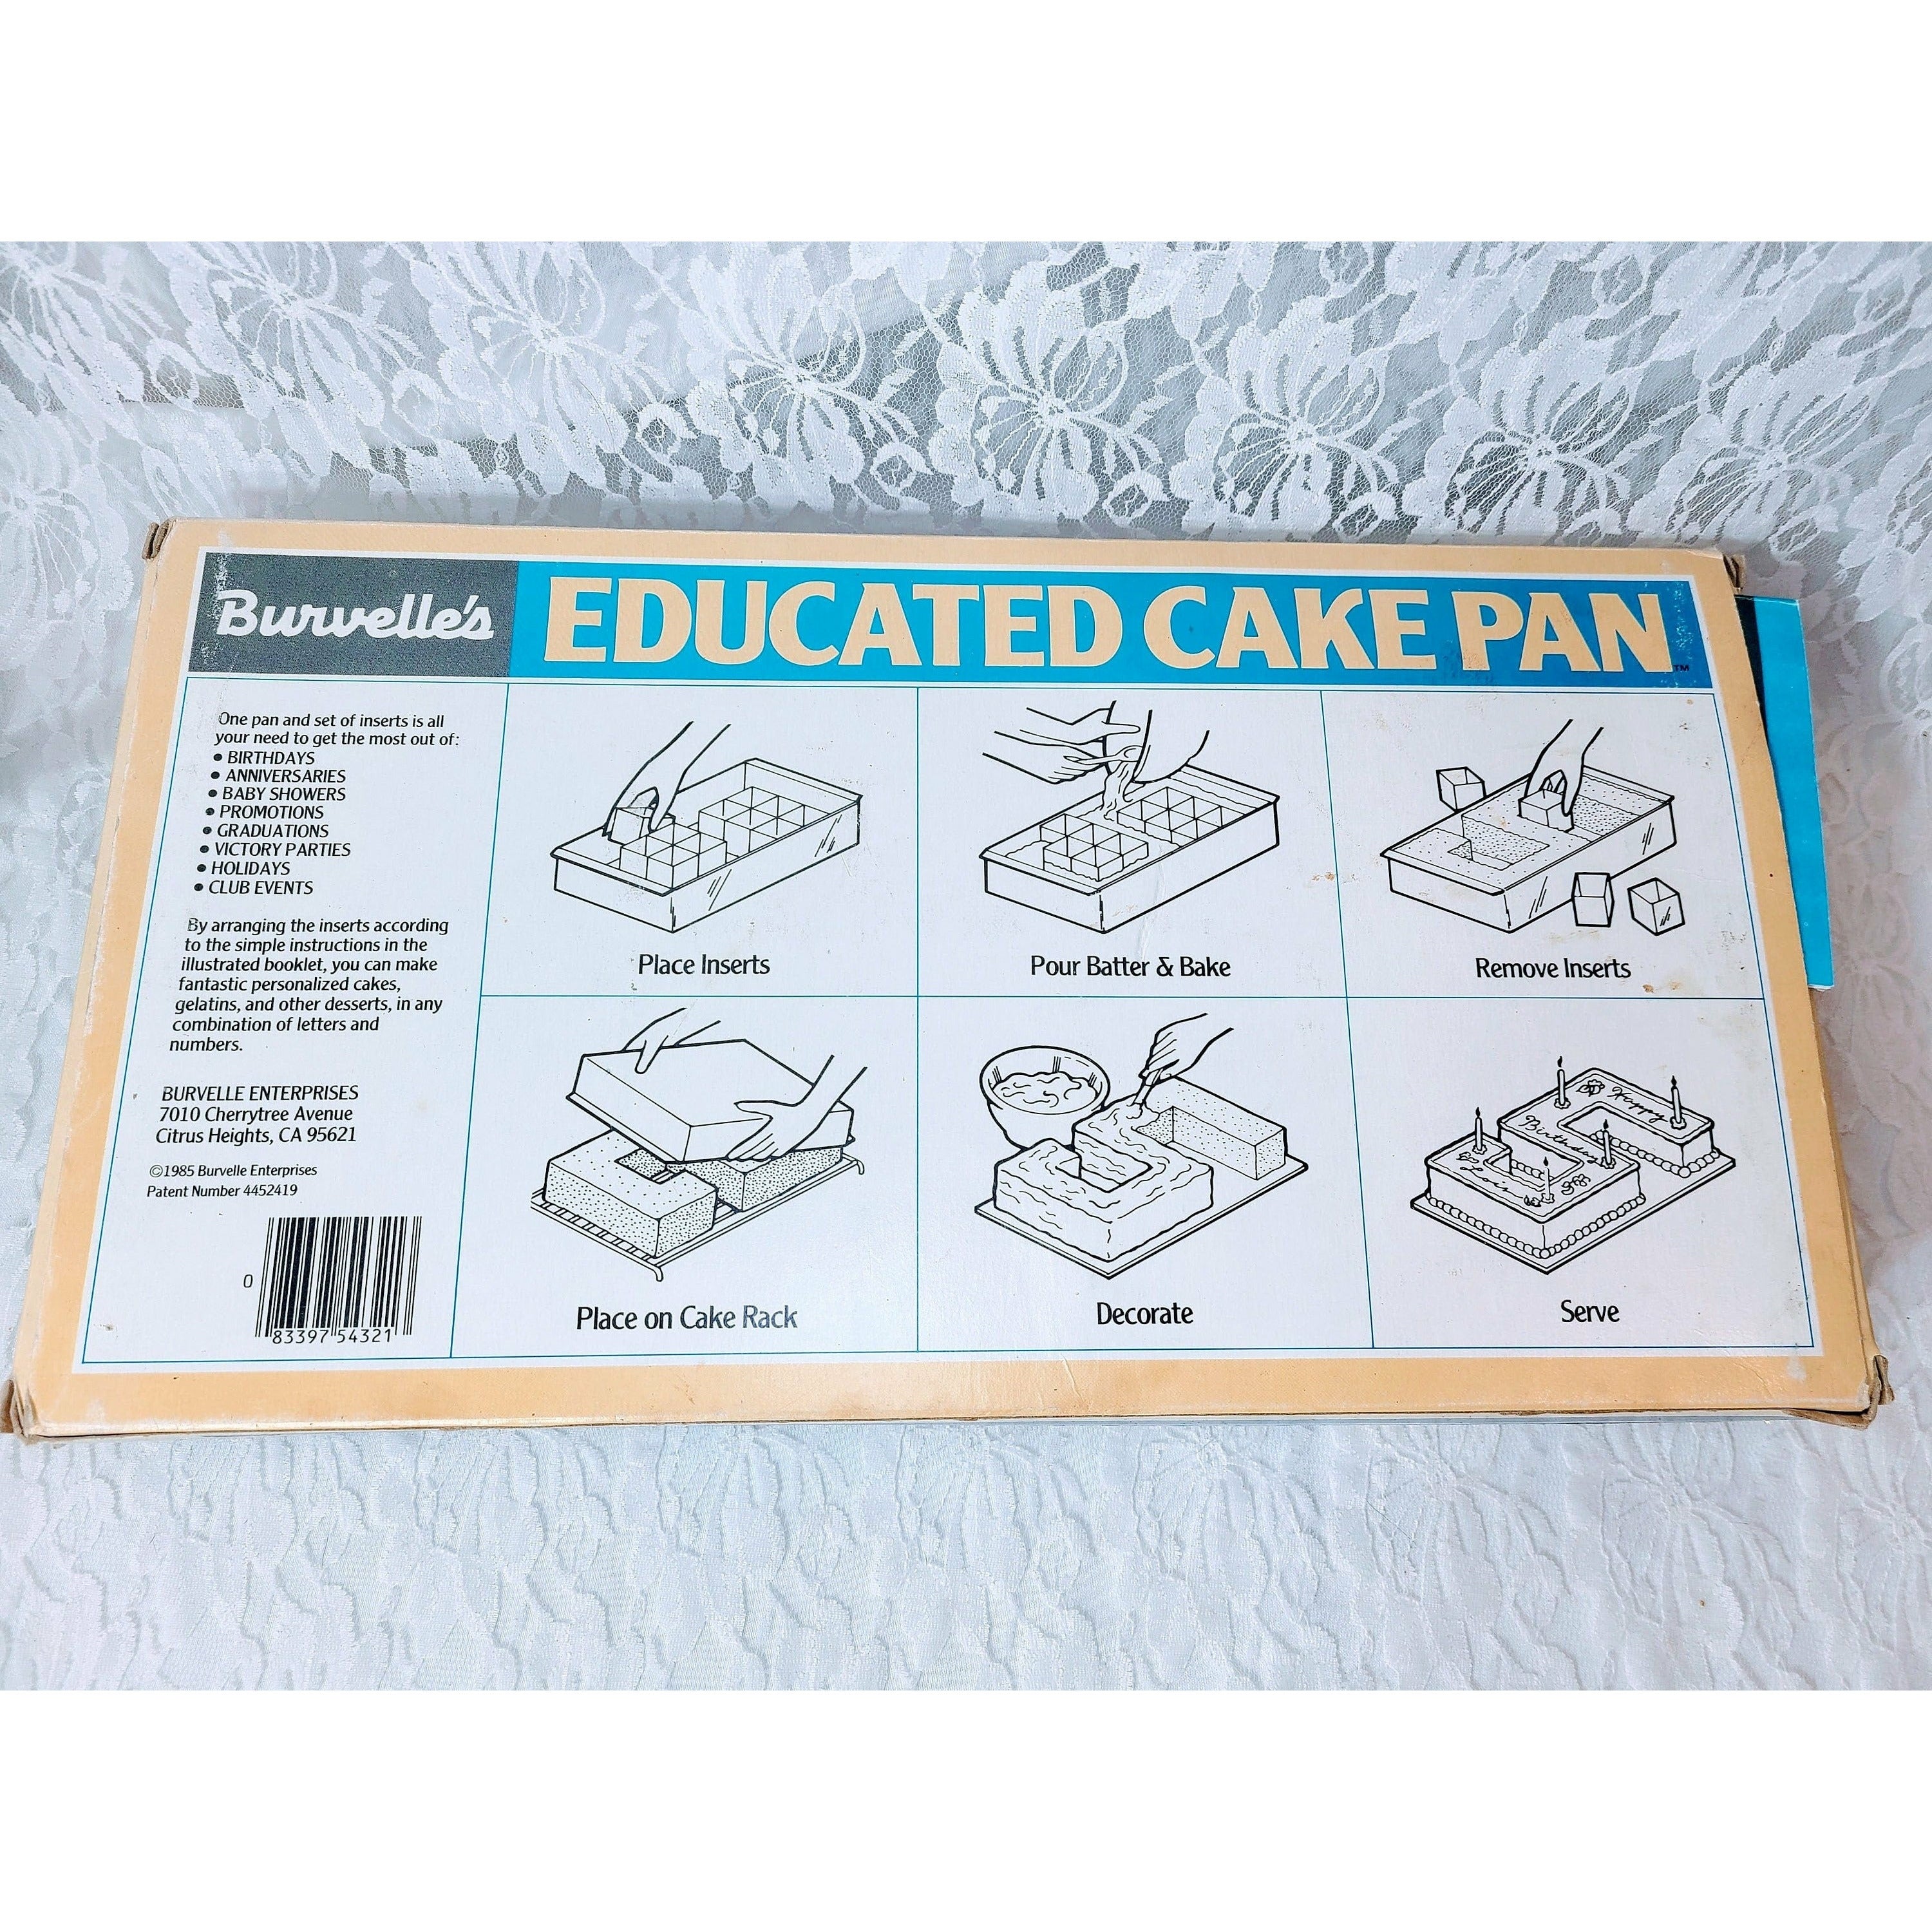 Free Wilton Cake Pan Instructions - CakeCentral.com